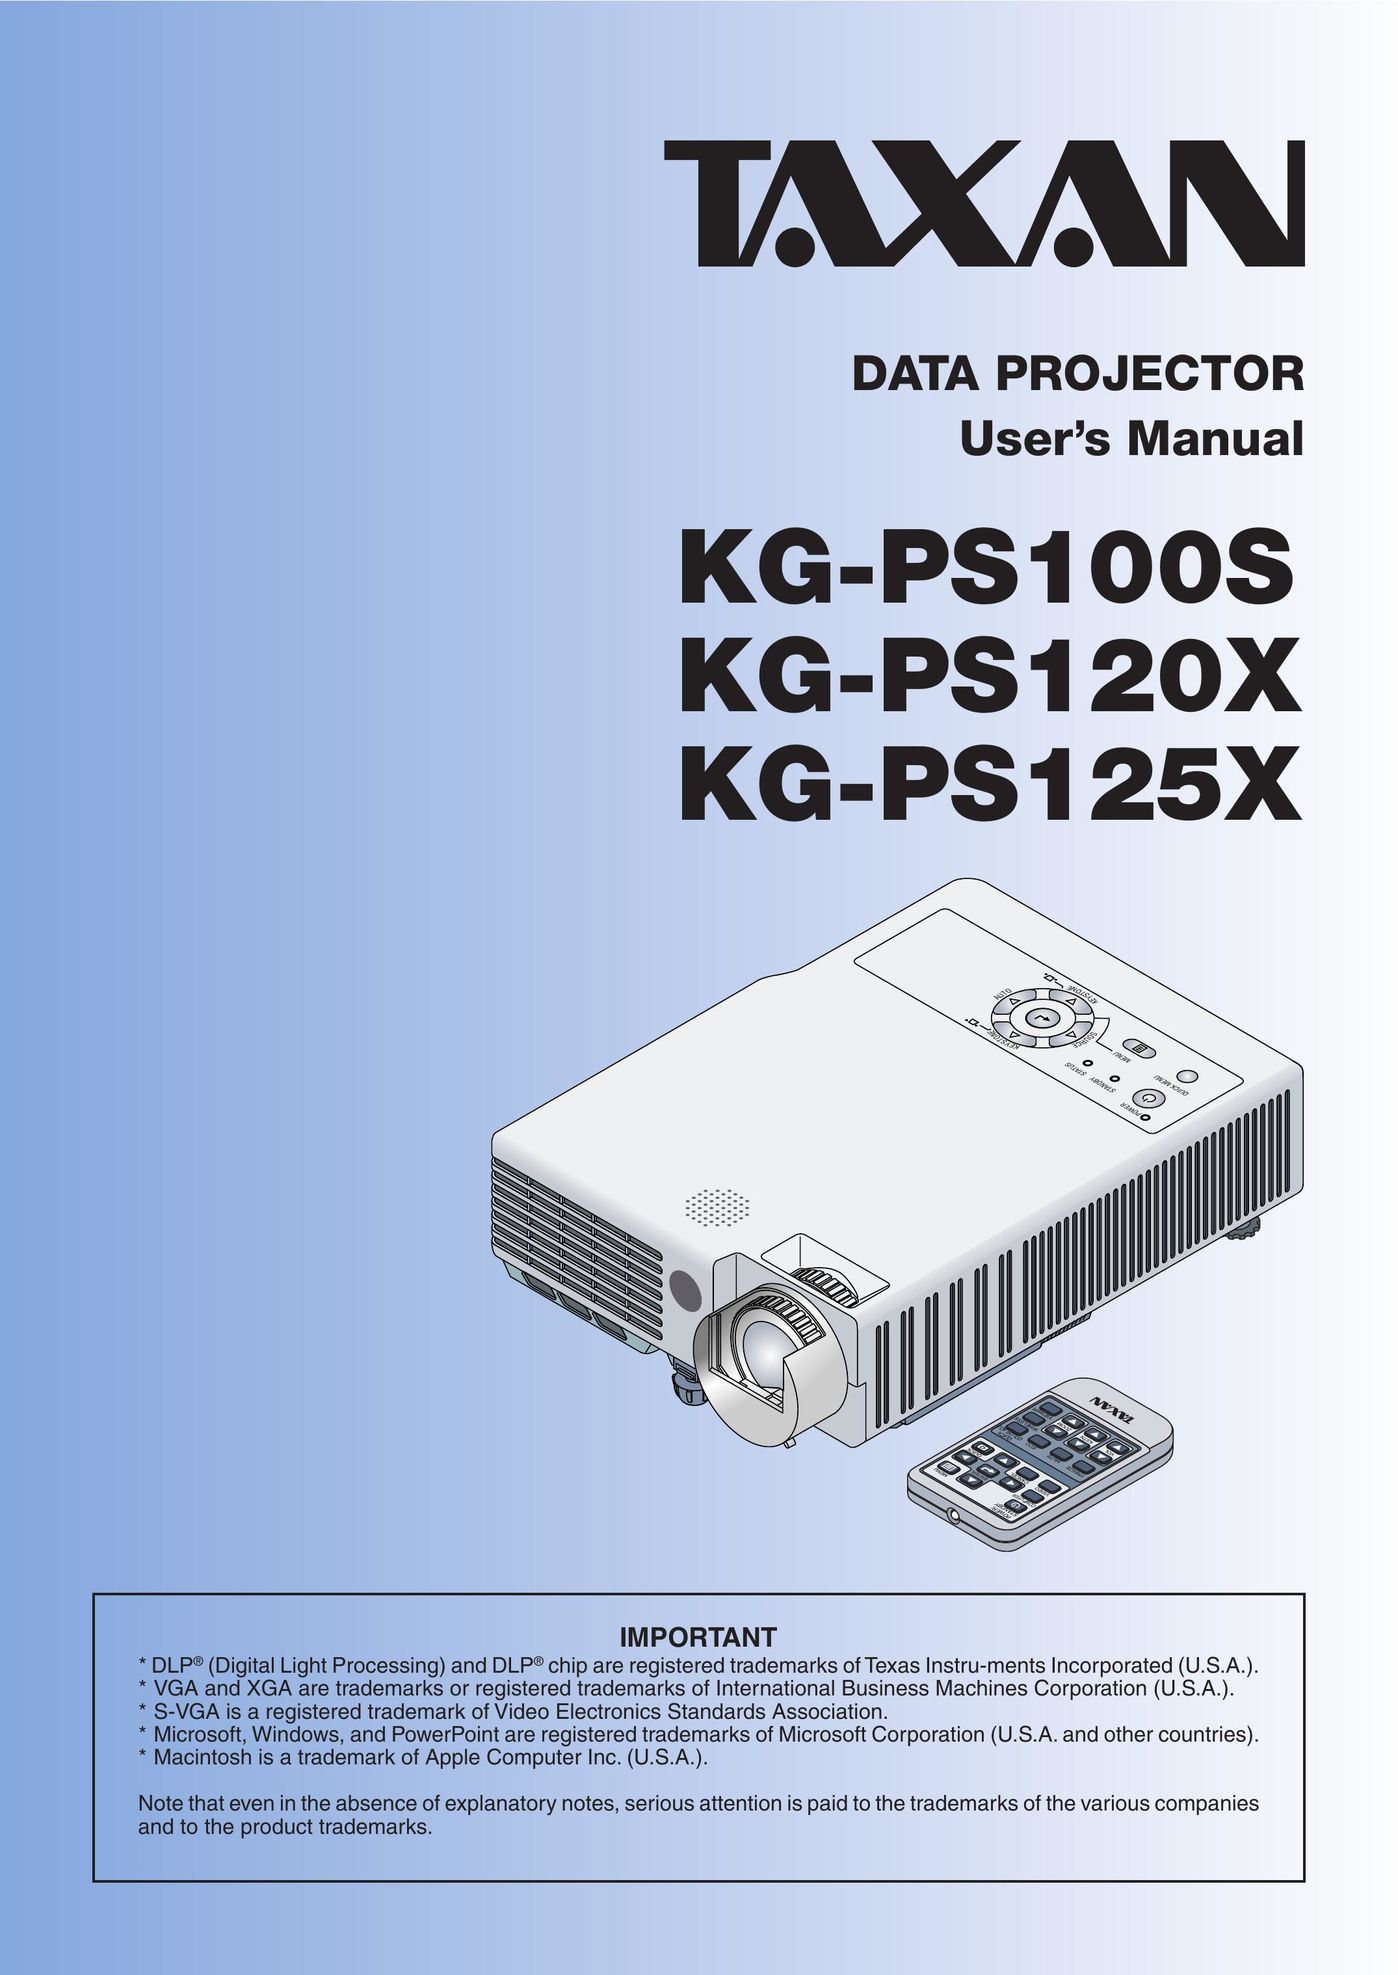 PLUS Vision KG-PS125X Projector User Manual